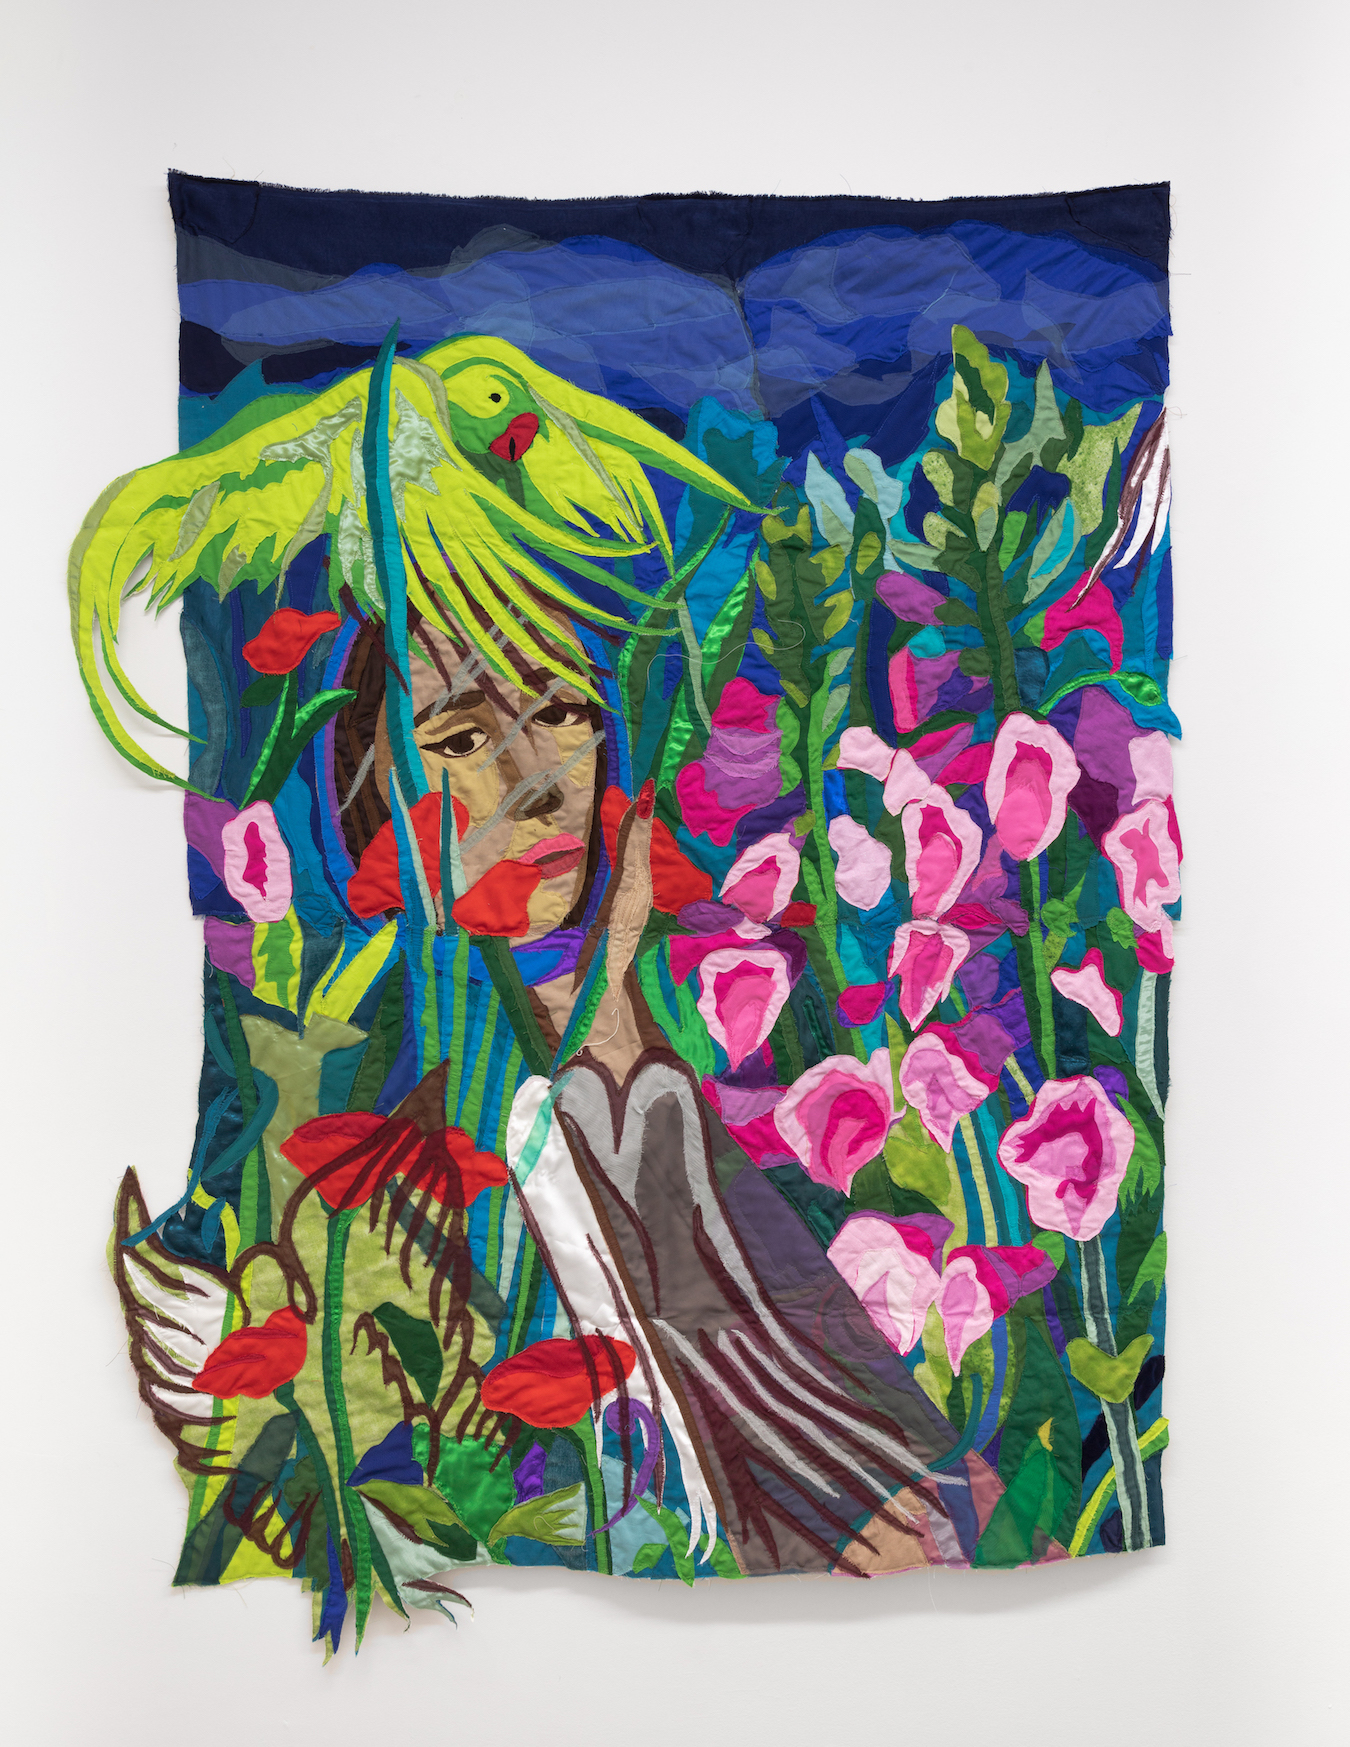 Self-portrait with Tooti Parrot, 2021, Chiffon, muslin, cotton, polyester, silk, net mesh, suede, color pencil, velvet, and found fabric, 58.5 x 44.5 in
Courtesy of Cooper Cole, Toronto